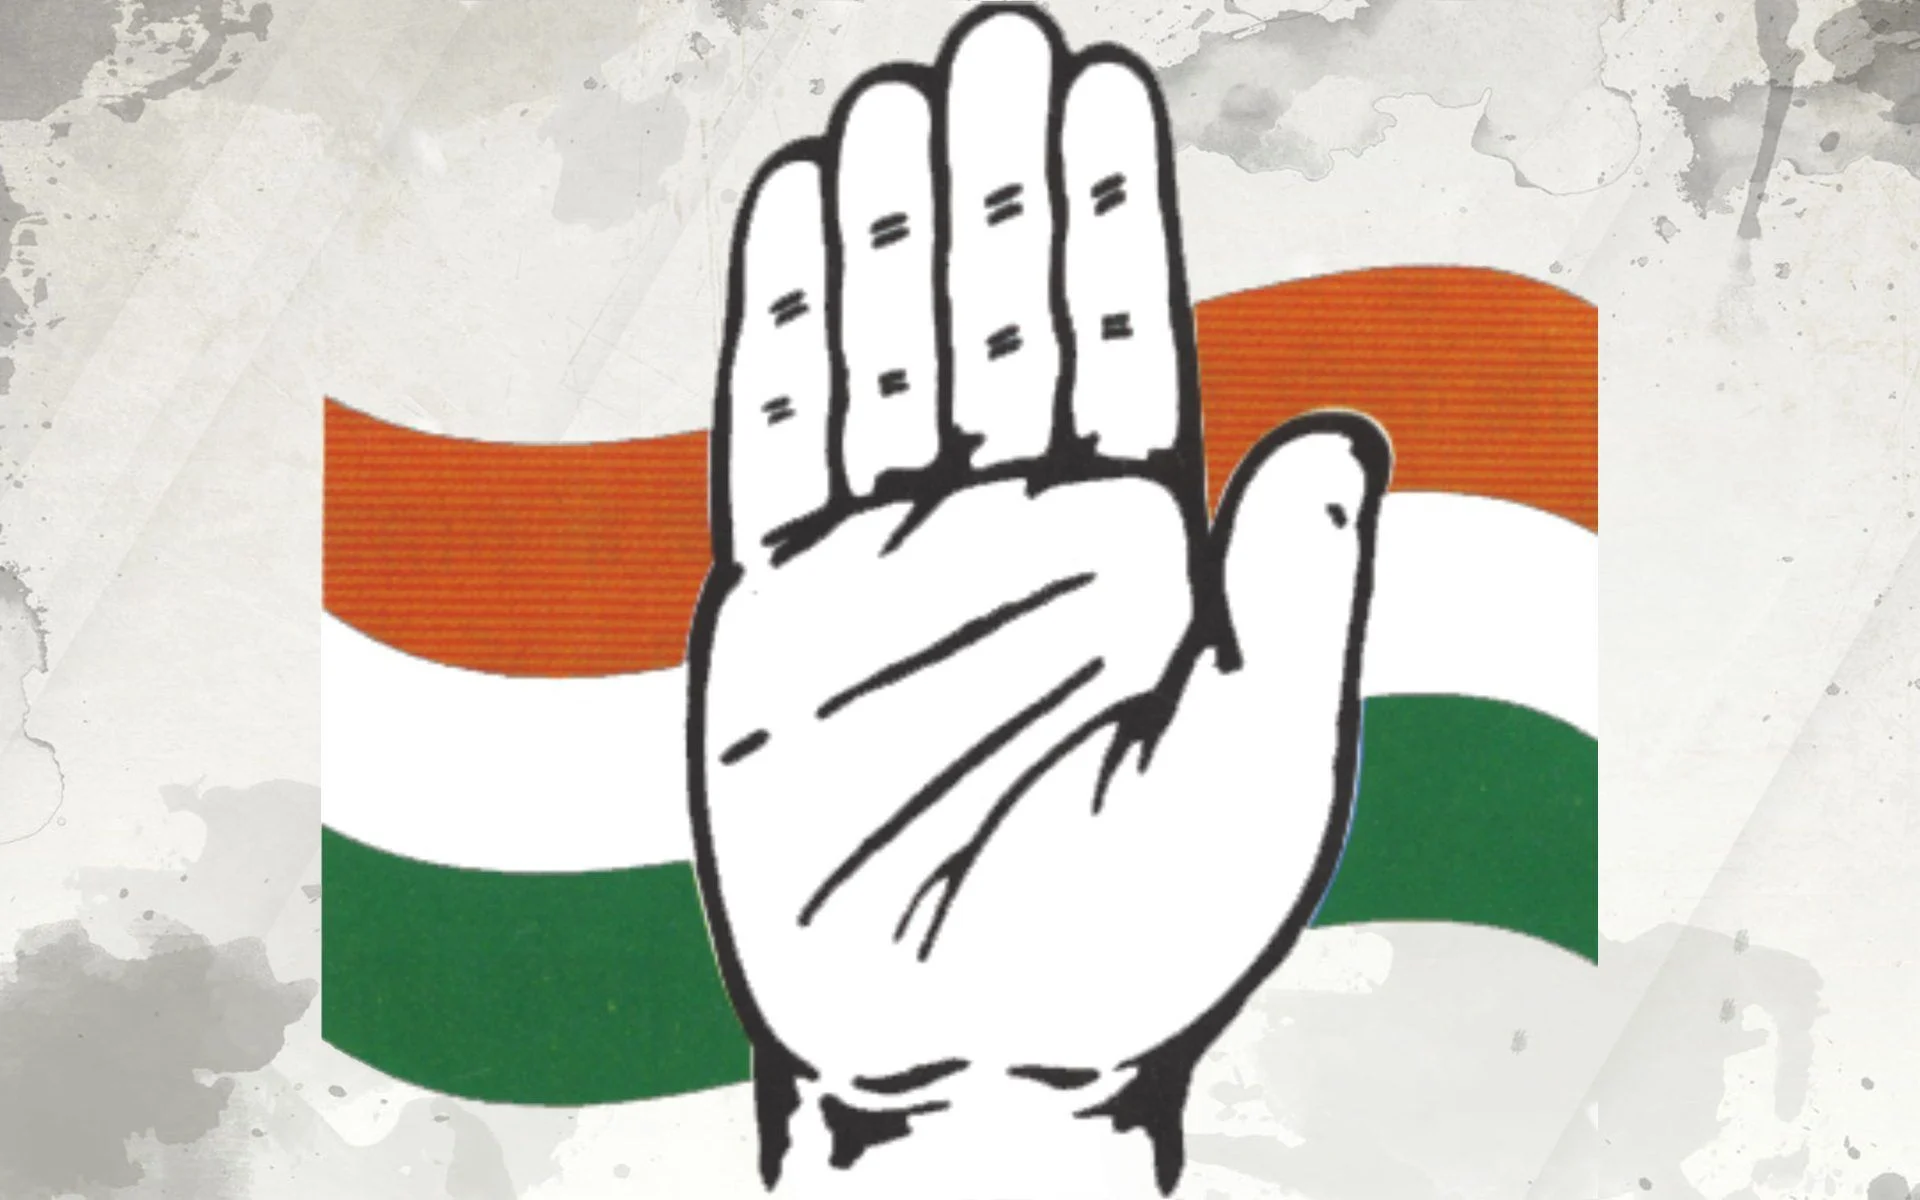 “Congress targets three key Parliament seats with ‘Operation Greater’.”